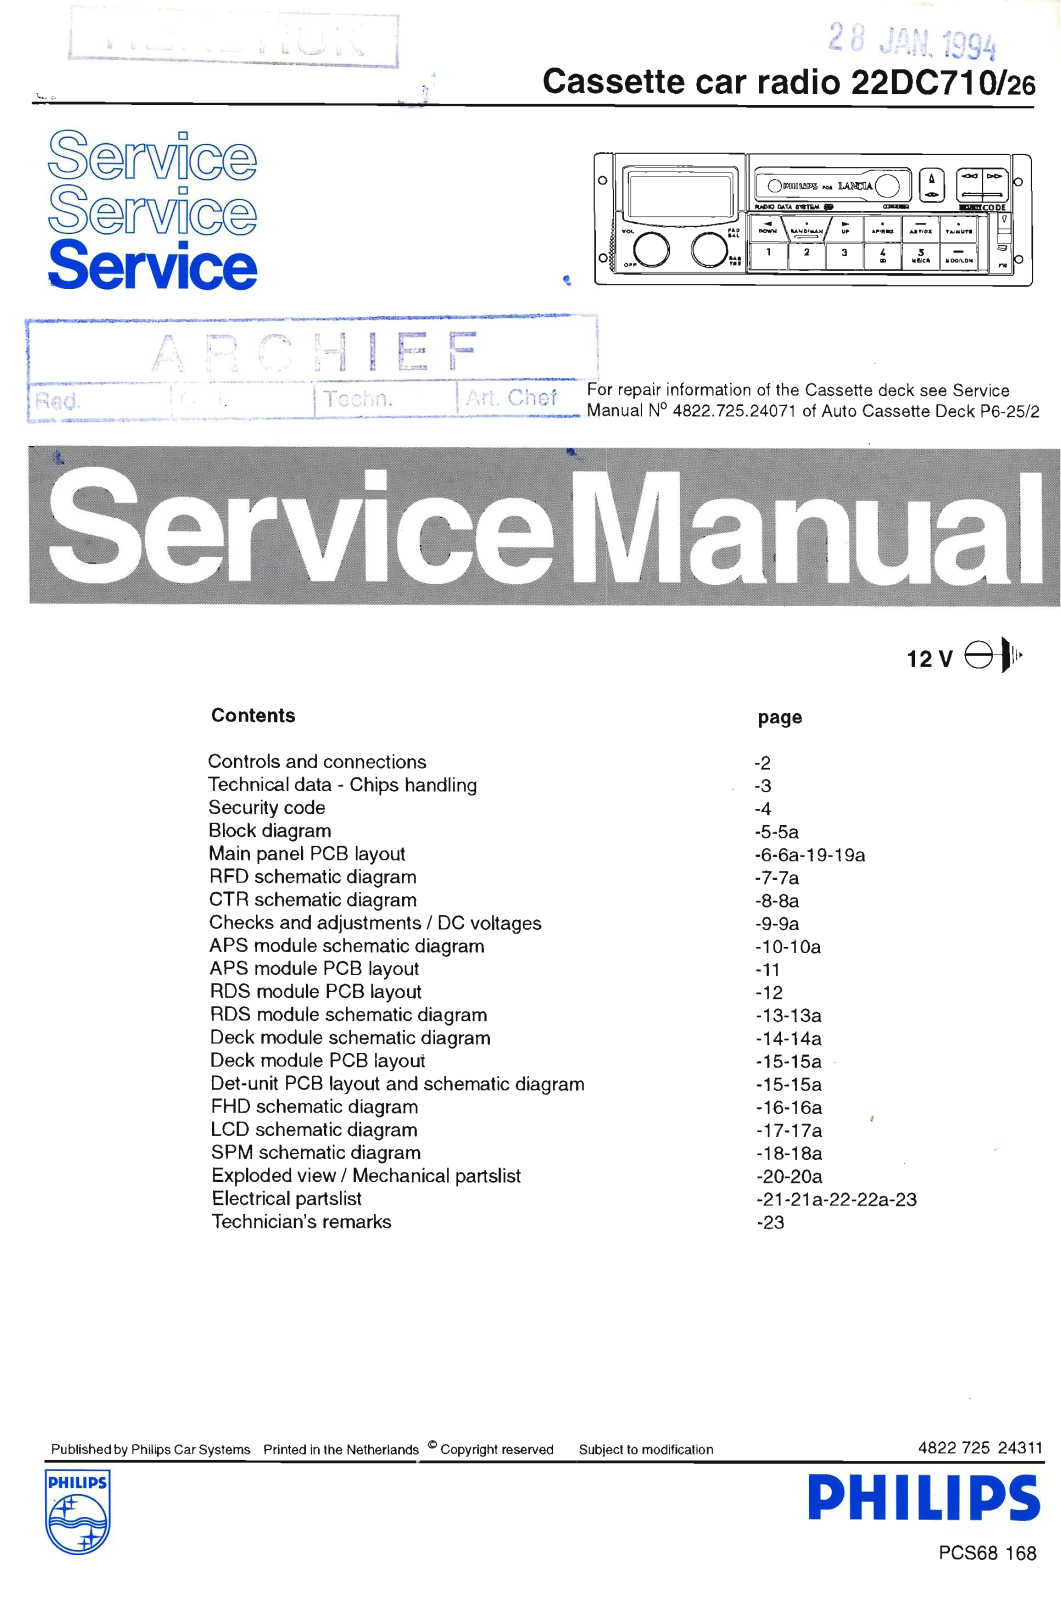 Philips 22-DC-710 Service Manual